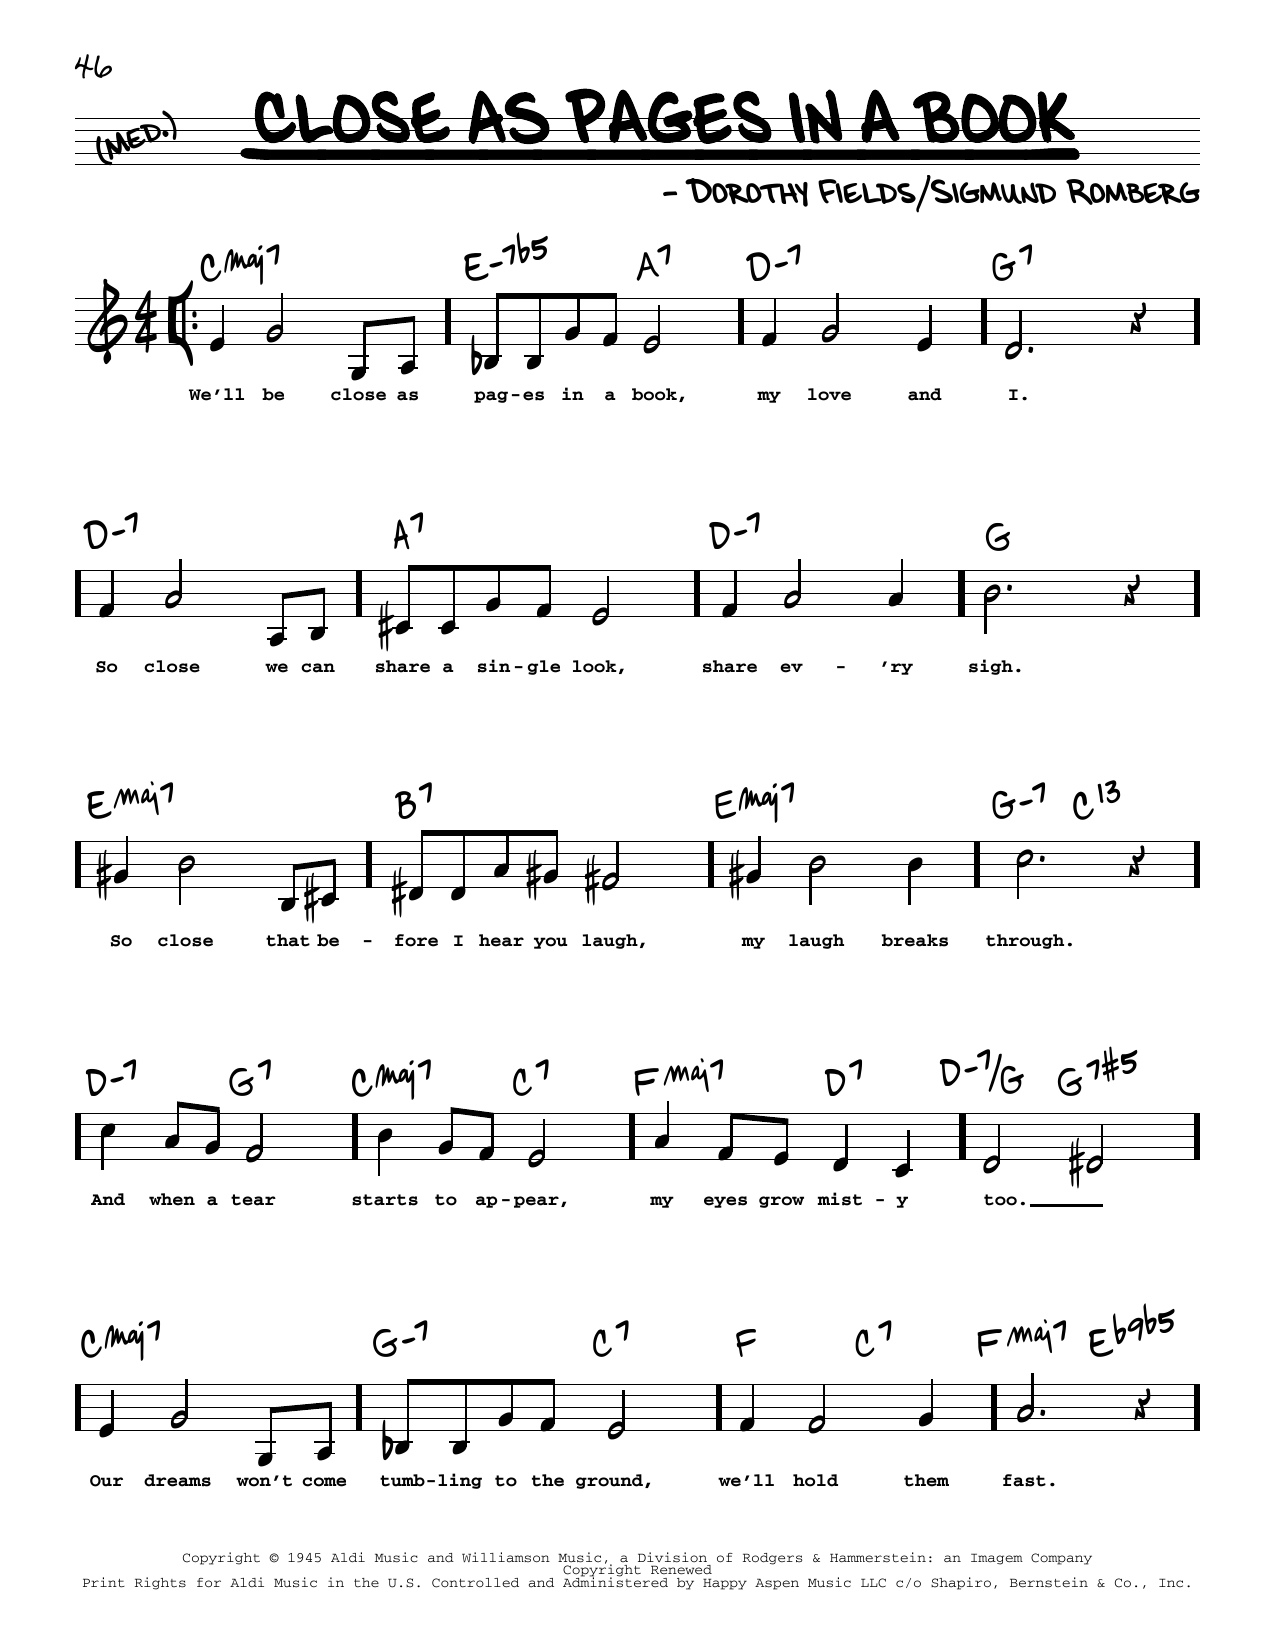 Benny Goodman Close As Pages In A Book (Low Voice) sheet music notes printable PDF score